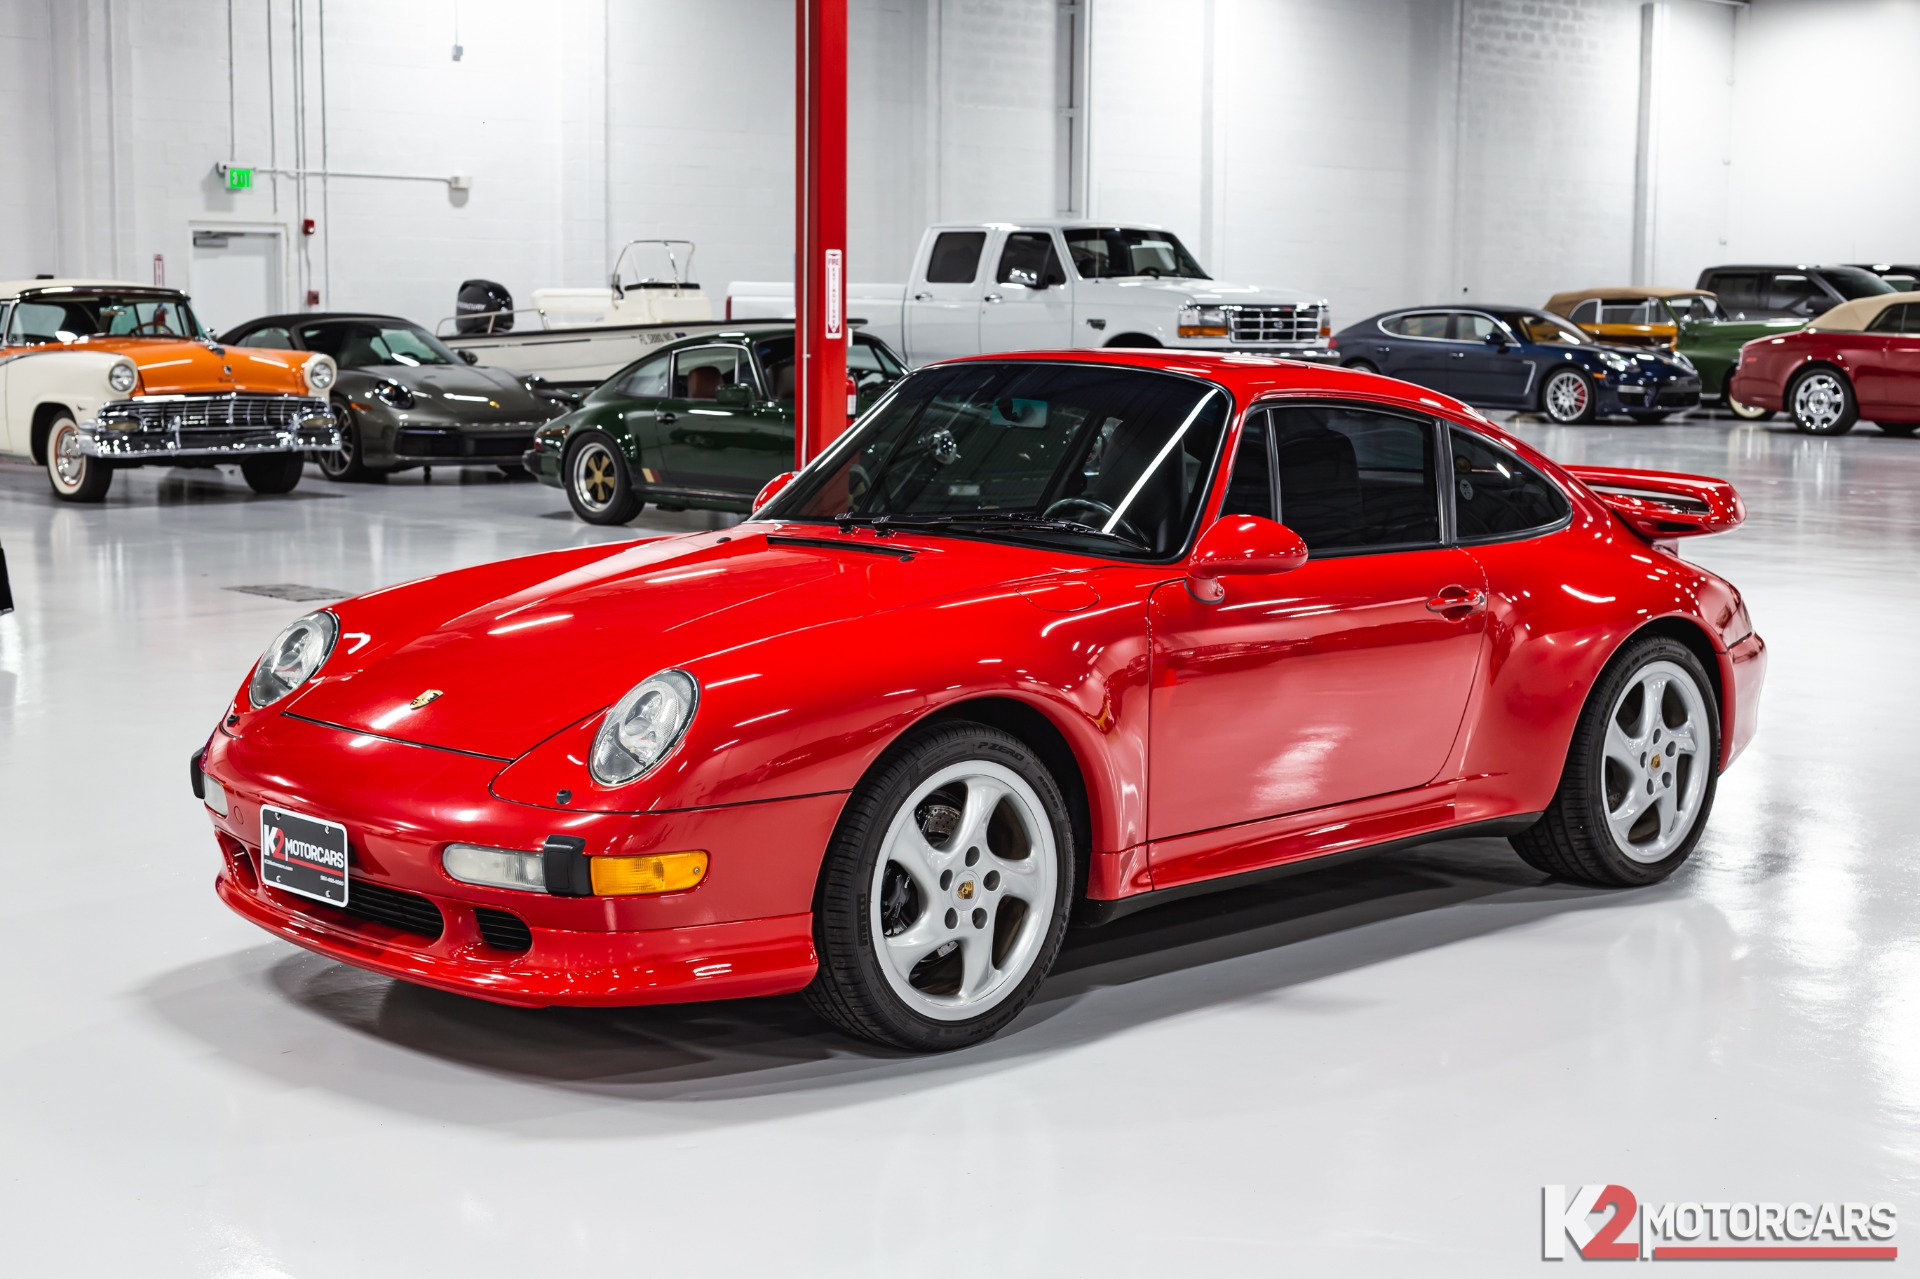 Used 1997 Porsche 911 Carrera 2S For Sale (Sold) | K2 Motorcars Stock #00003